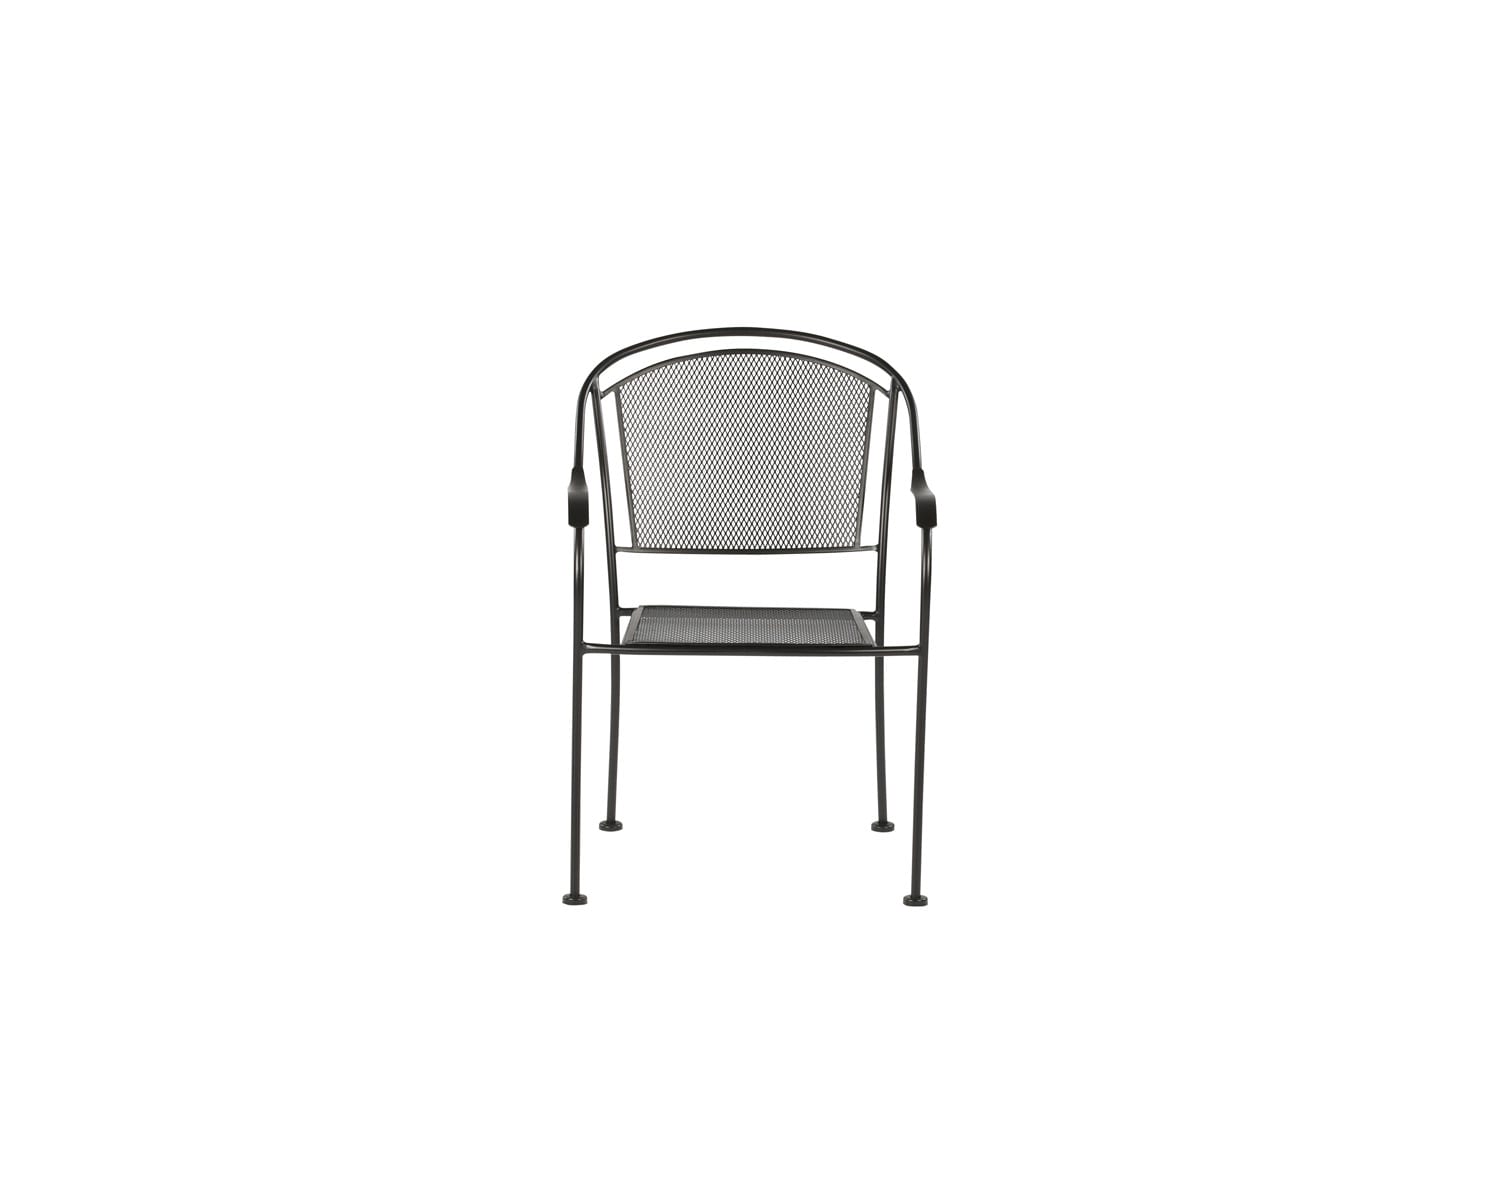 With Mesh Seat In The Patio Chairs, Garden Treasures Davenport Stackable Metal Stationary Dining Chair